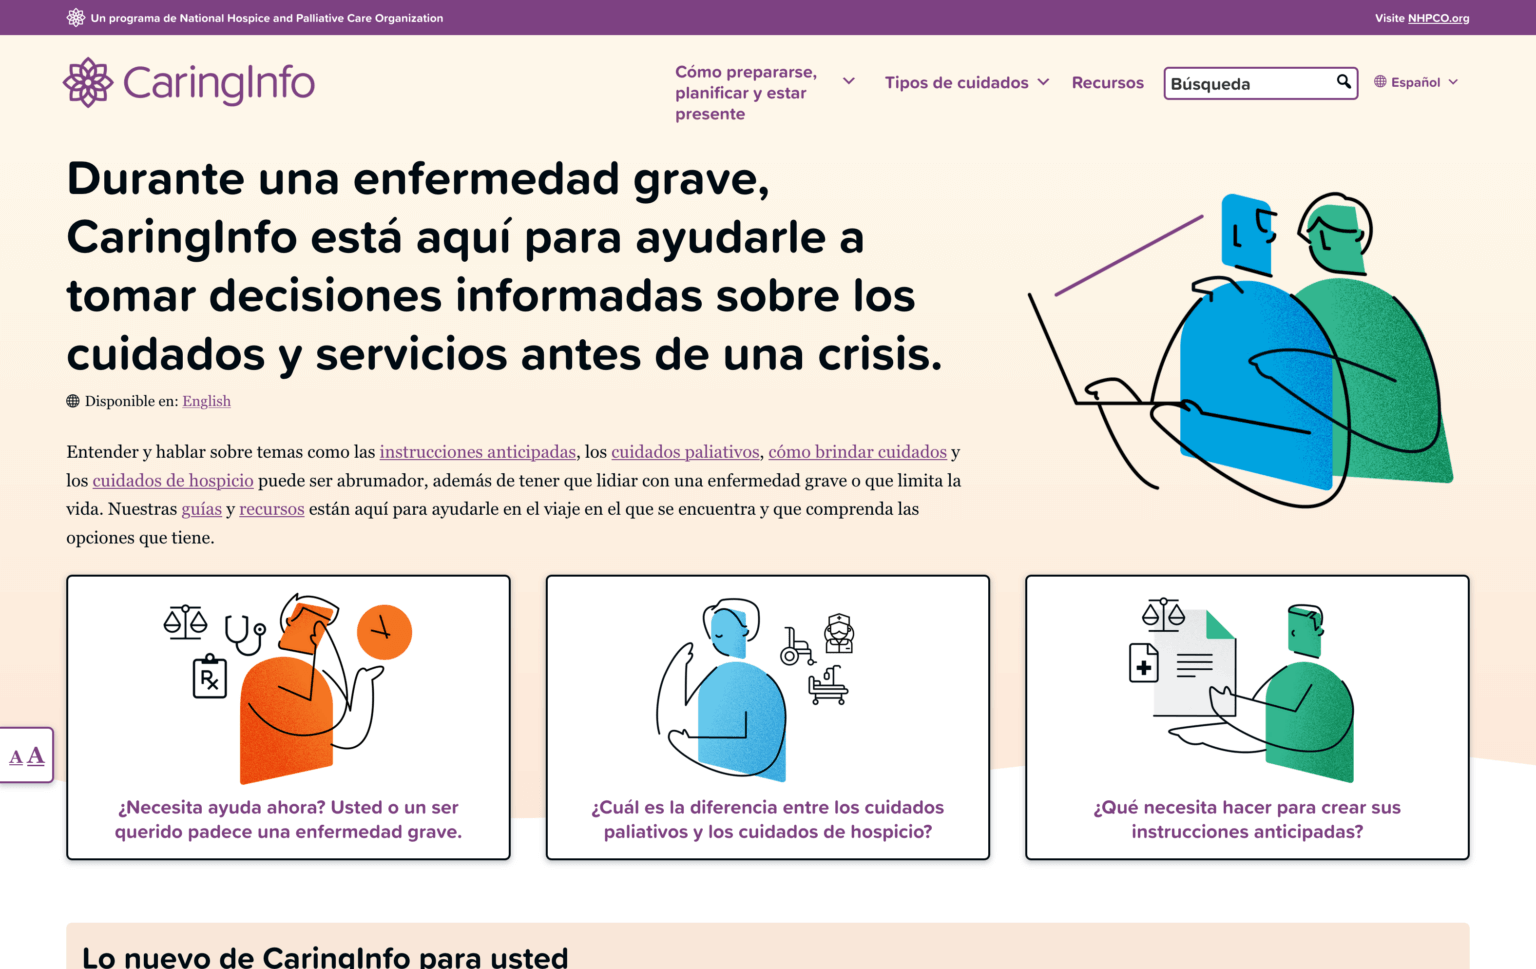 The CaringInfo homepage translated in to Spanish.